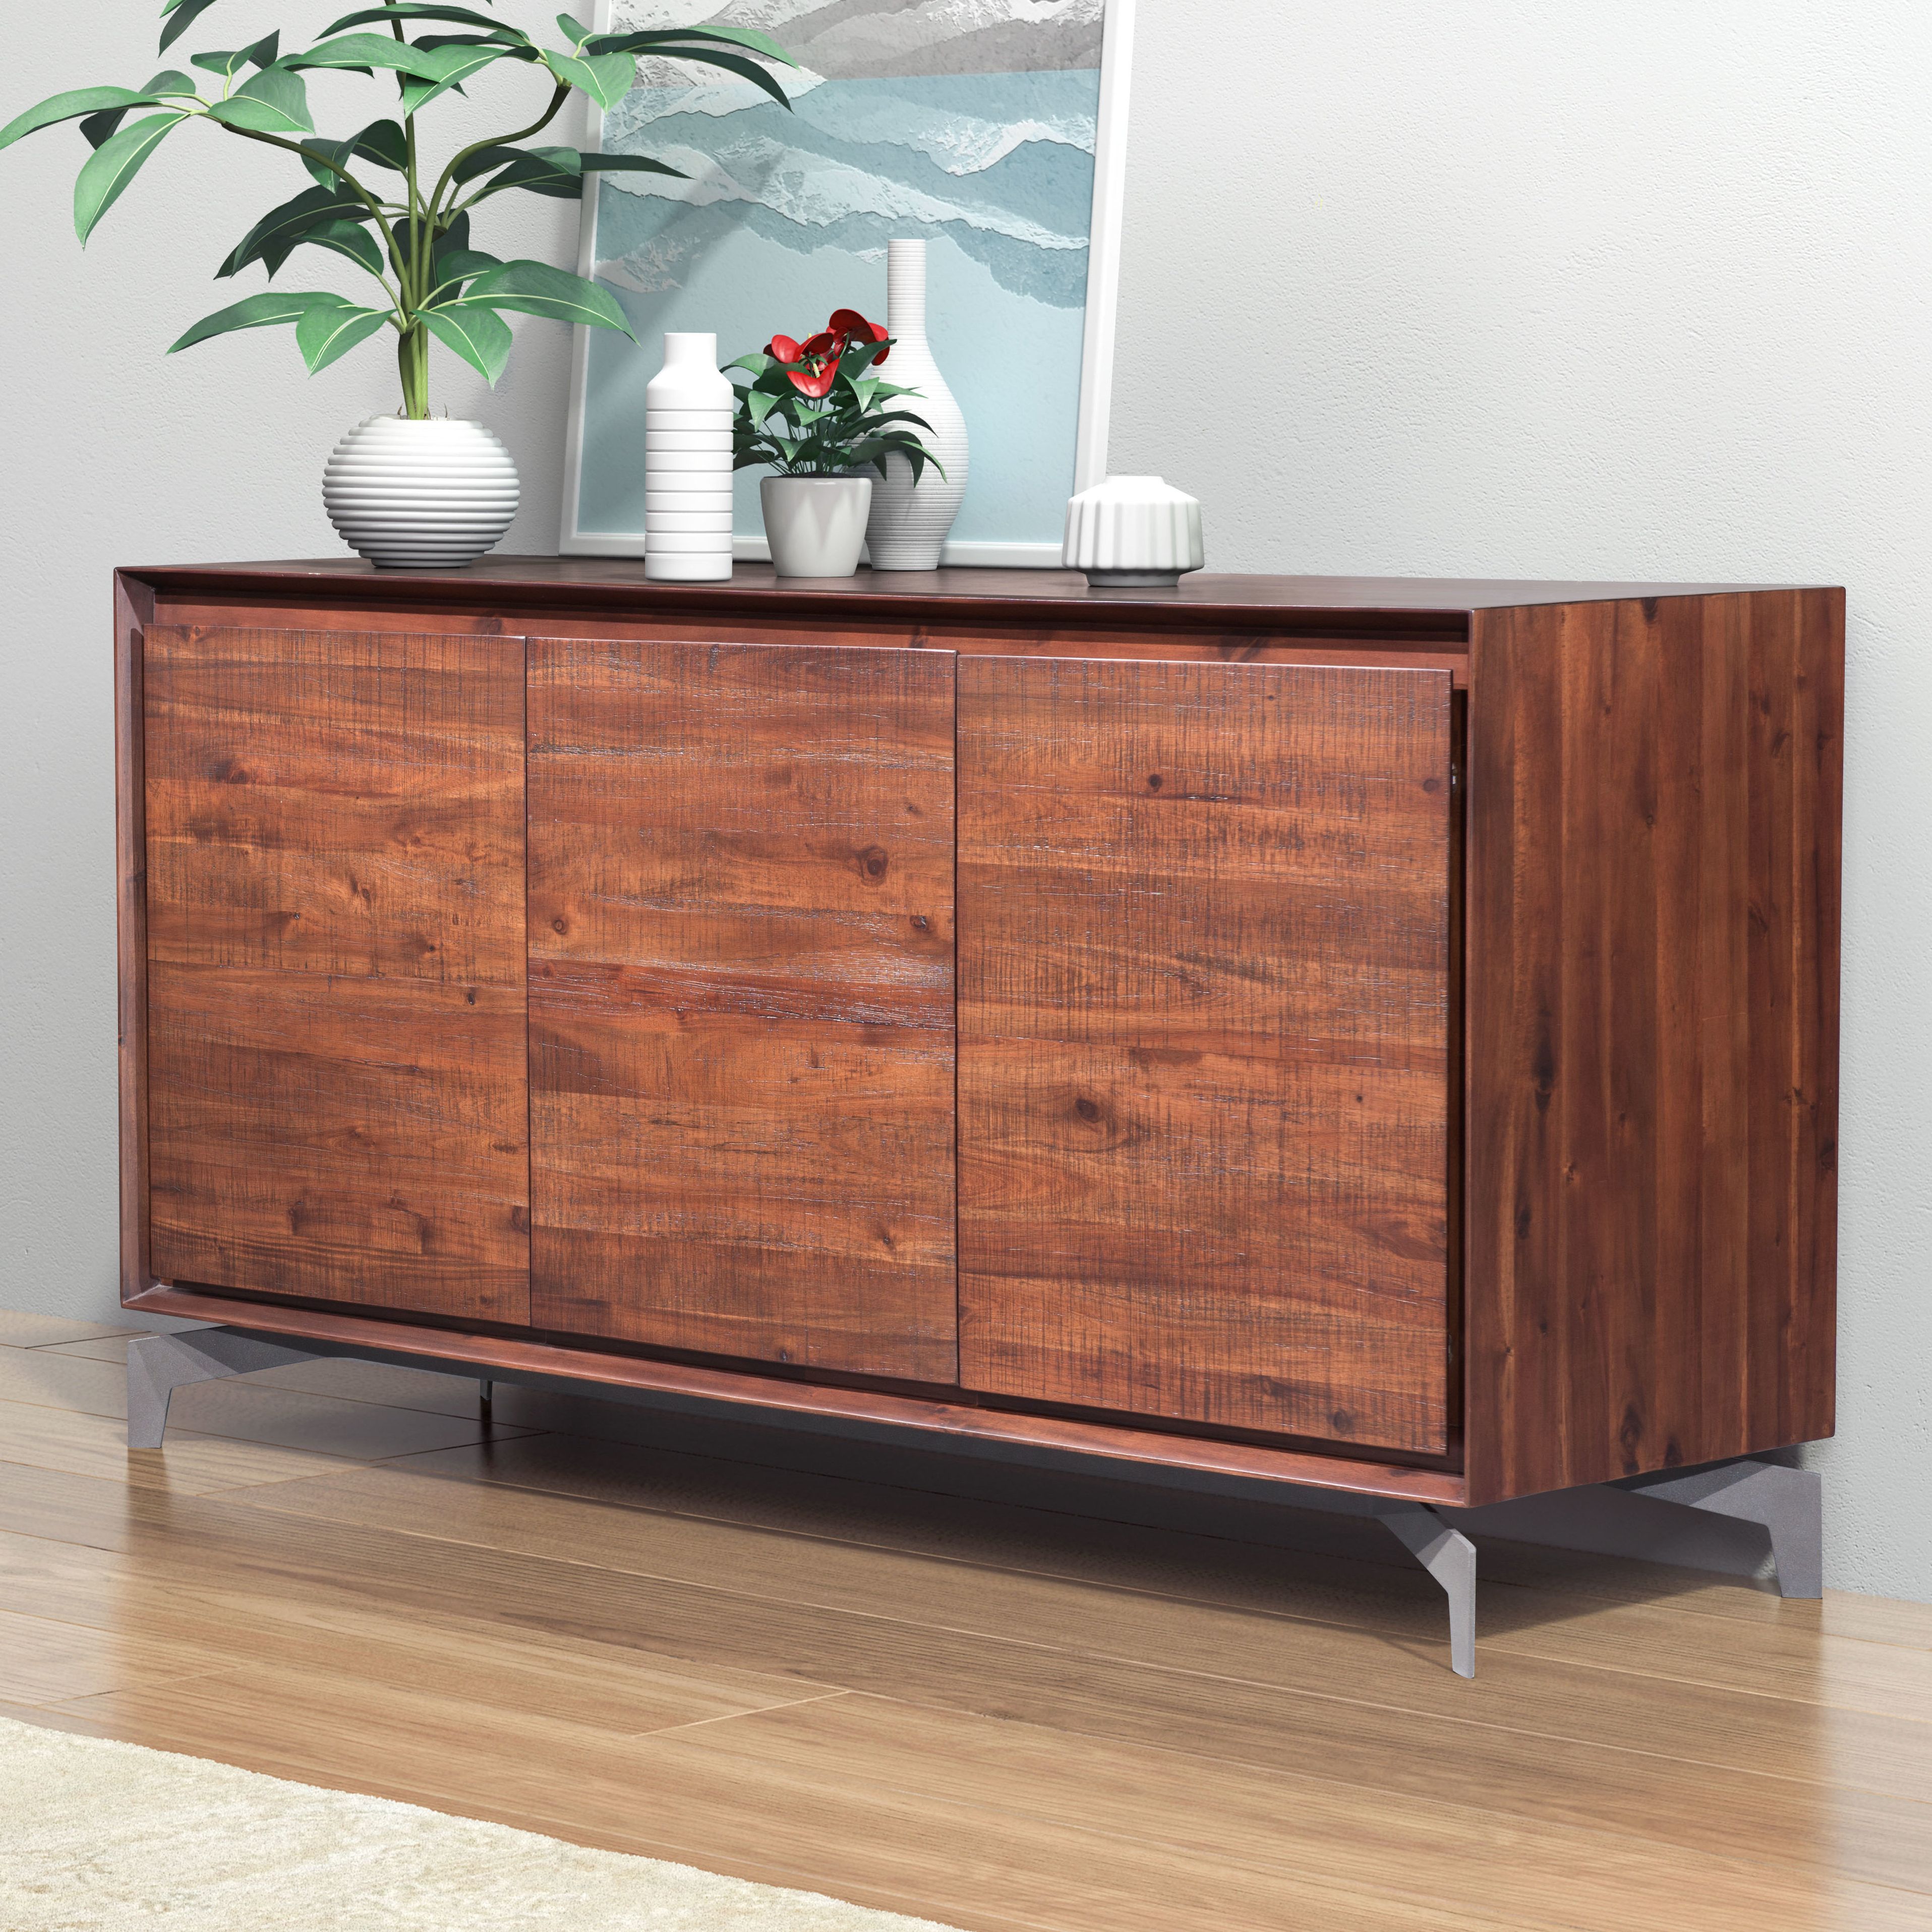 Riggleman Sideboard | Joss & Main Intended For Remington Sideboards (Gallery 7 of 20)